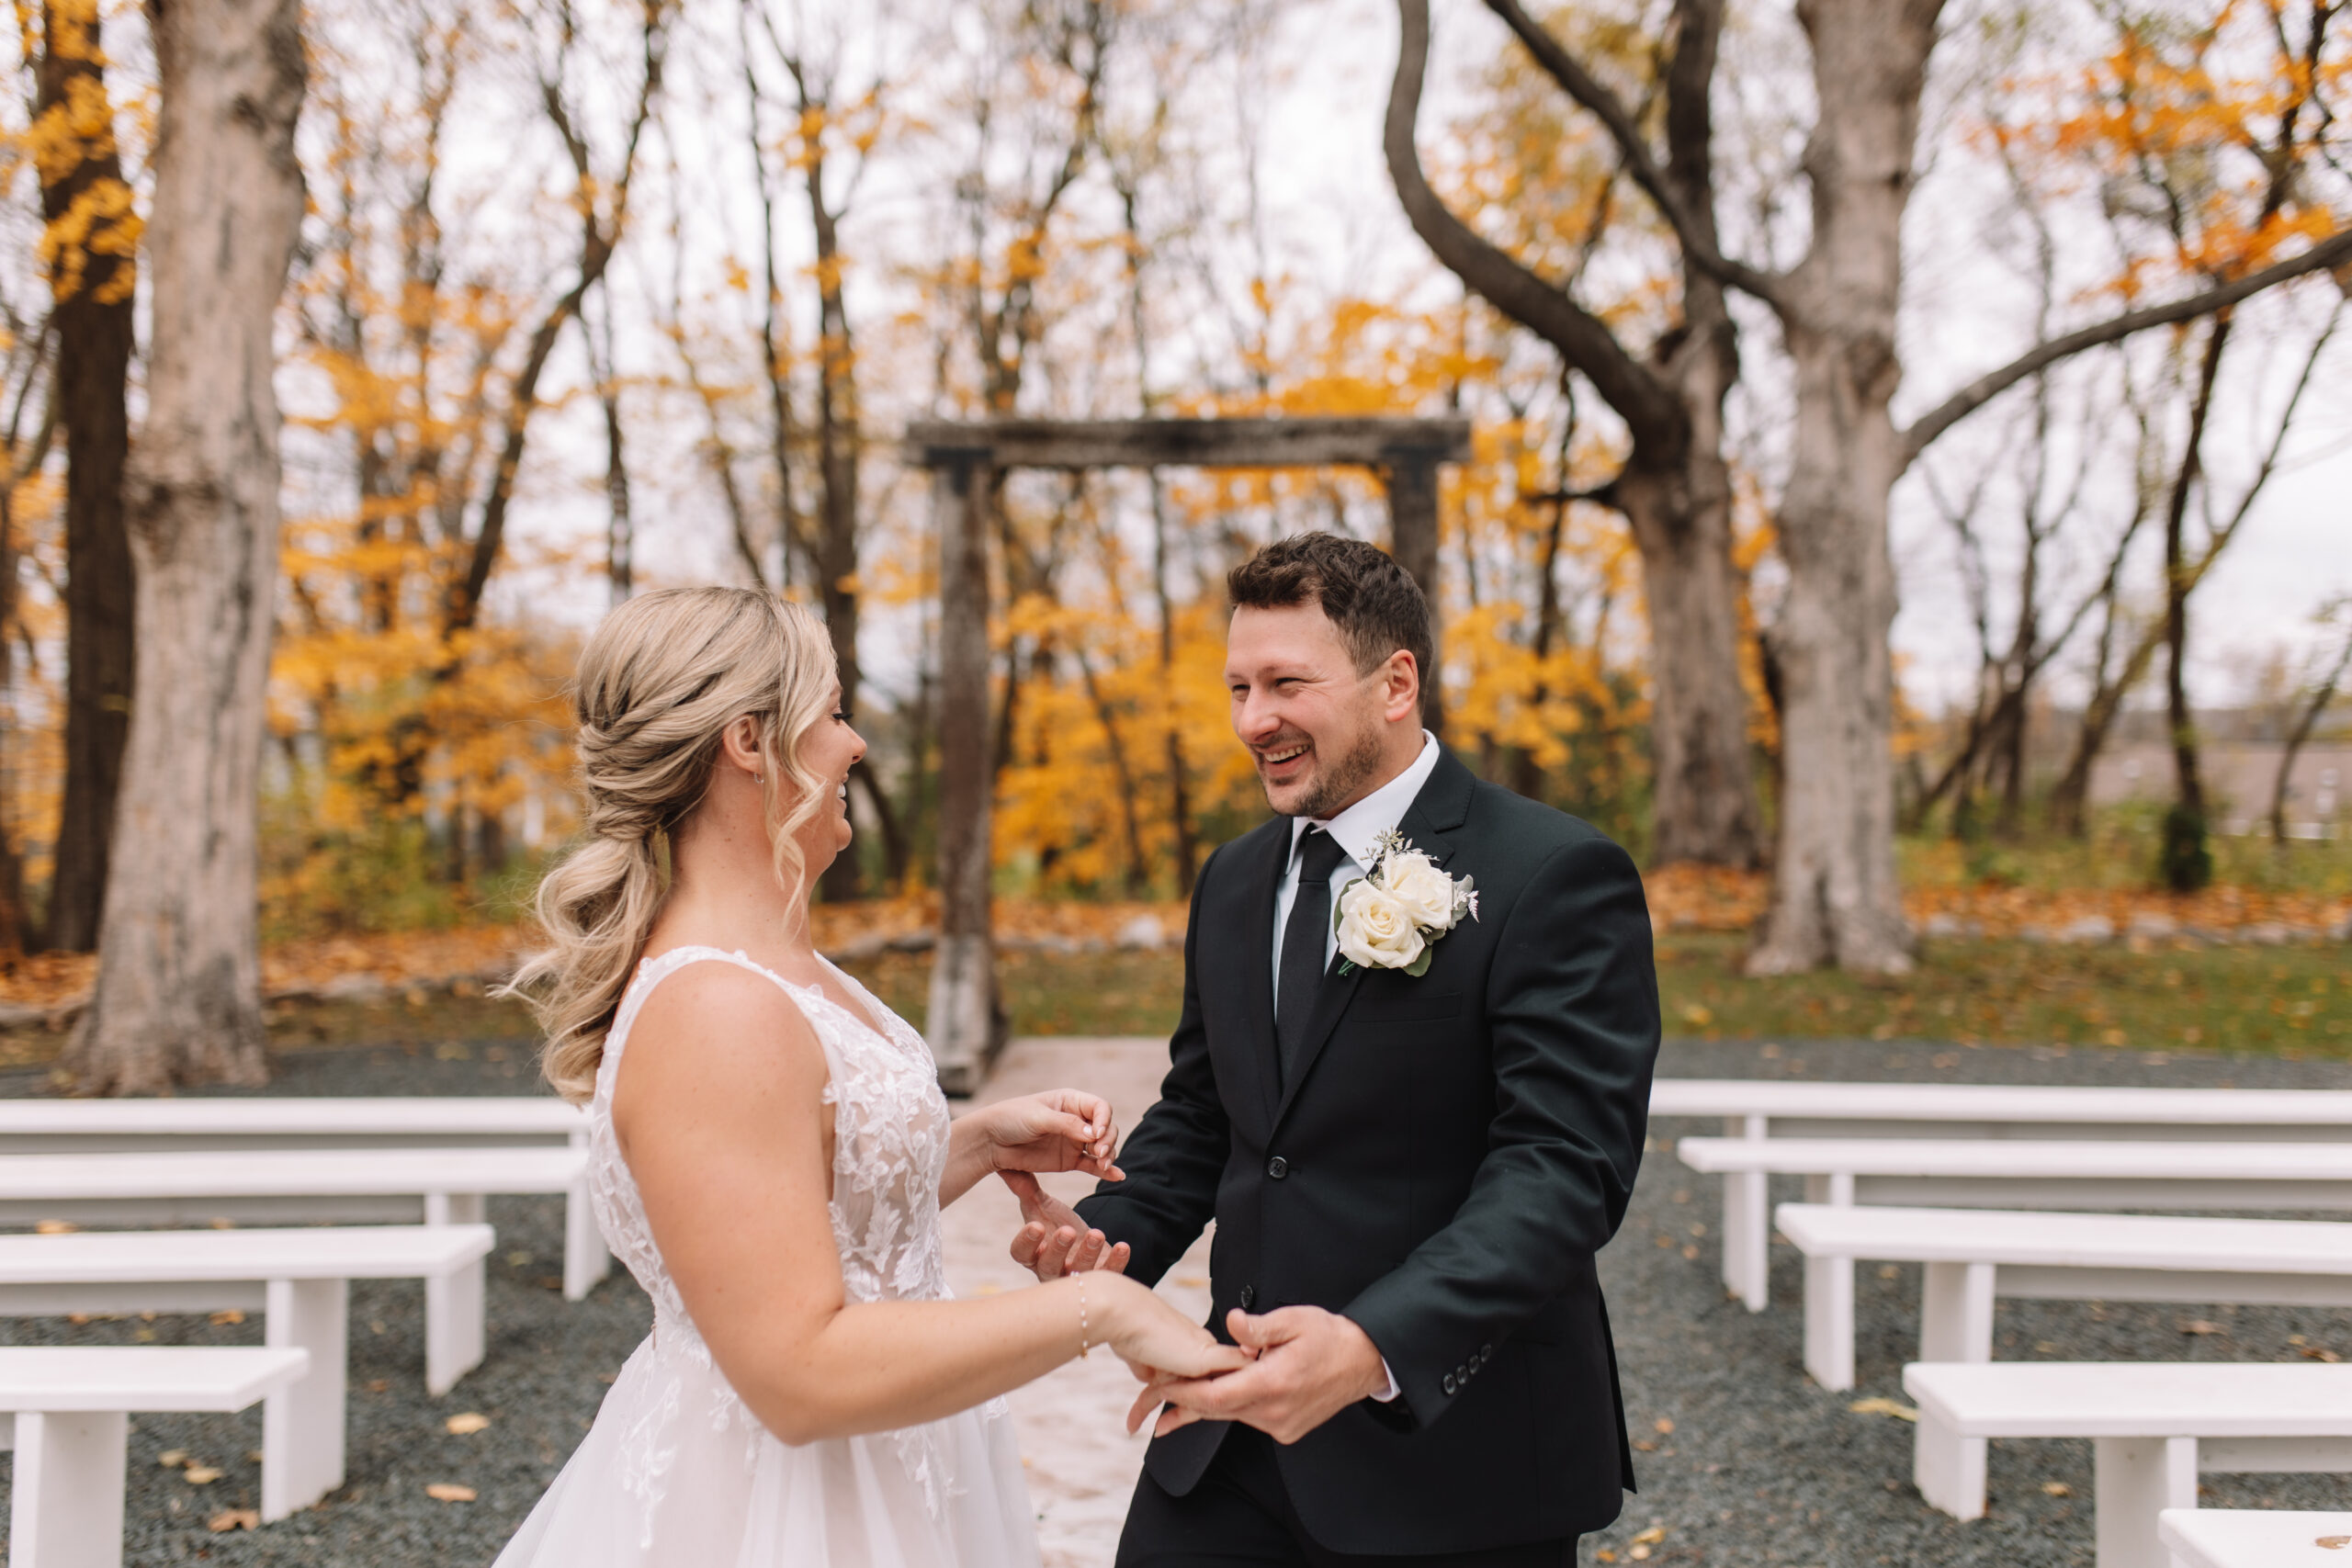 Groom taking his Bride's hands as he smiles at her happily during their first look